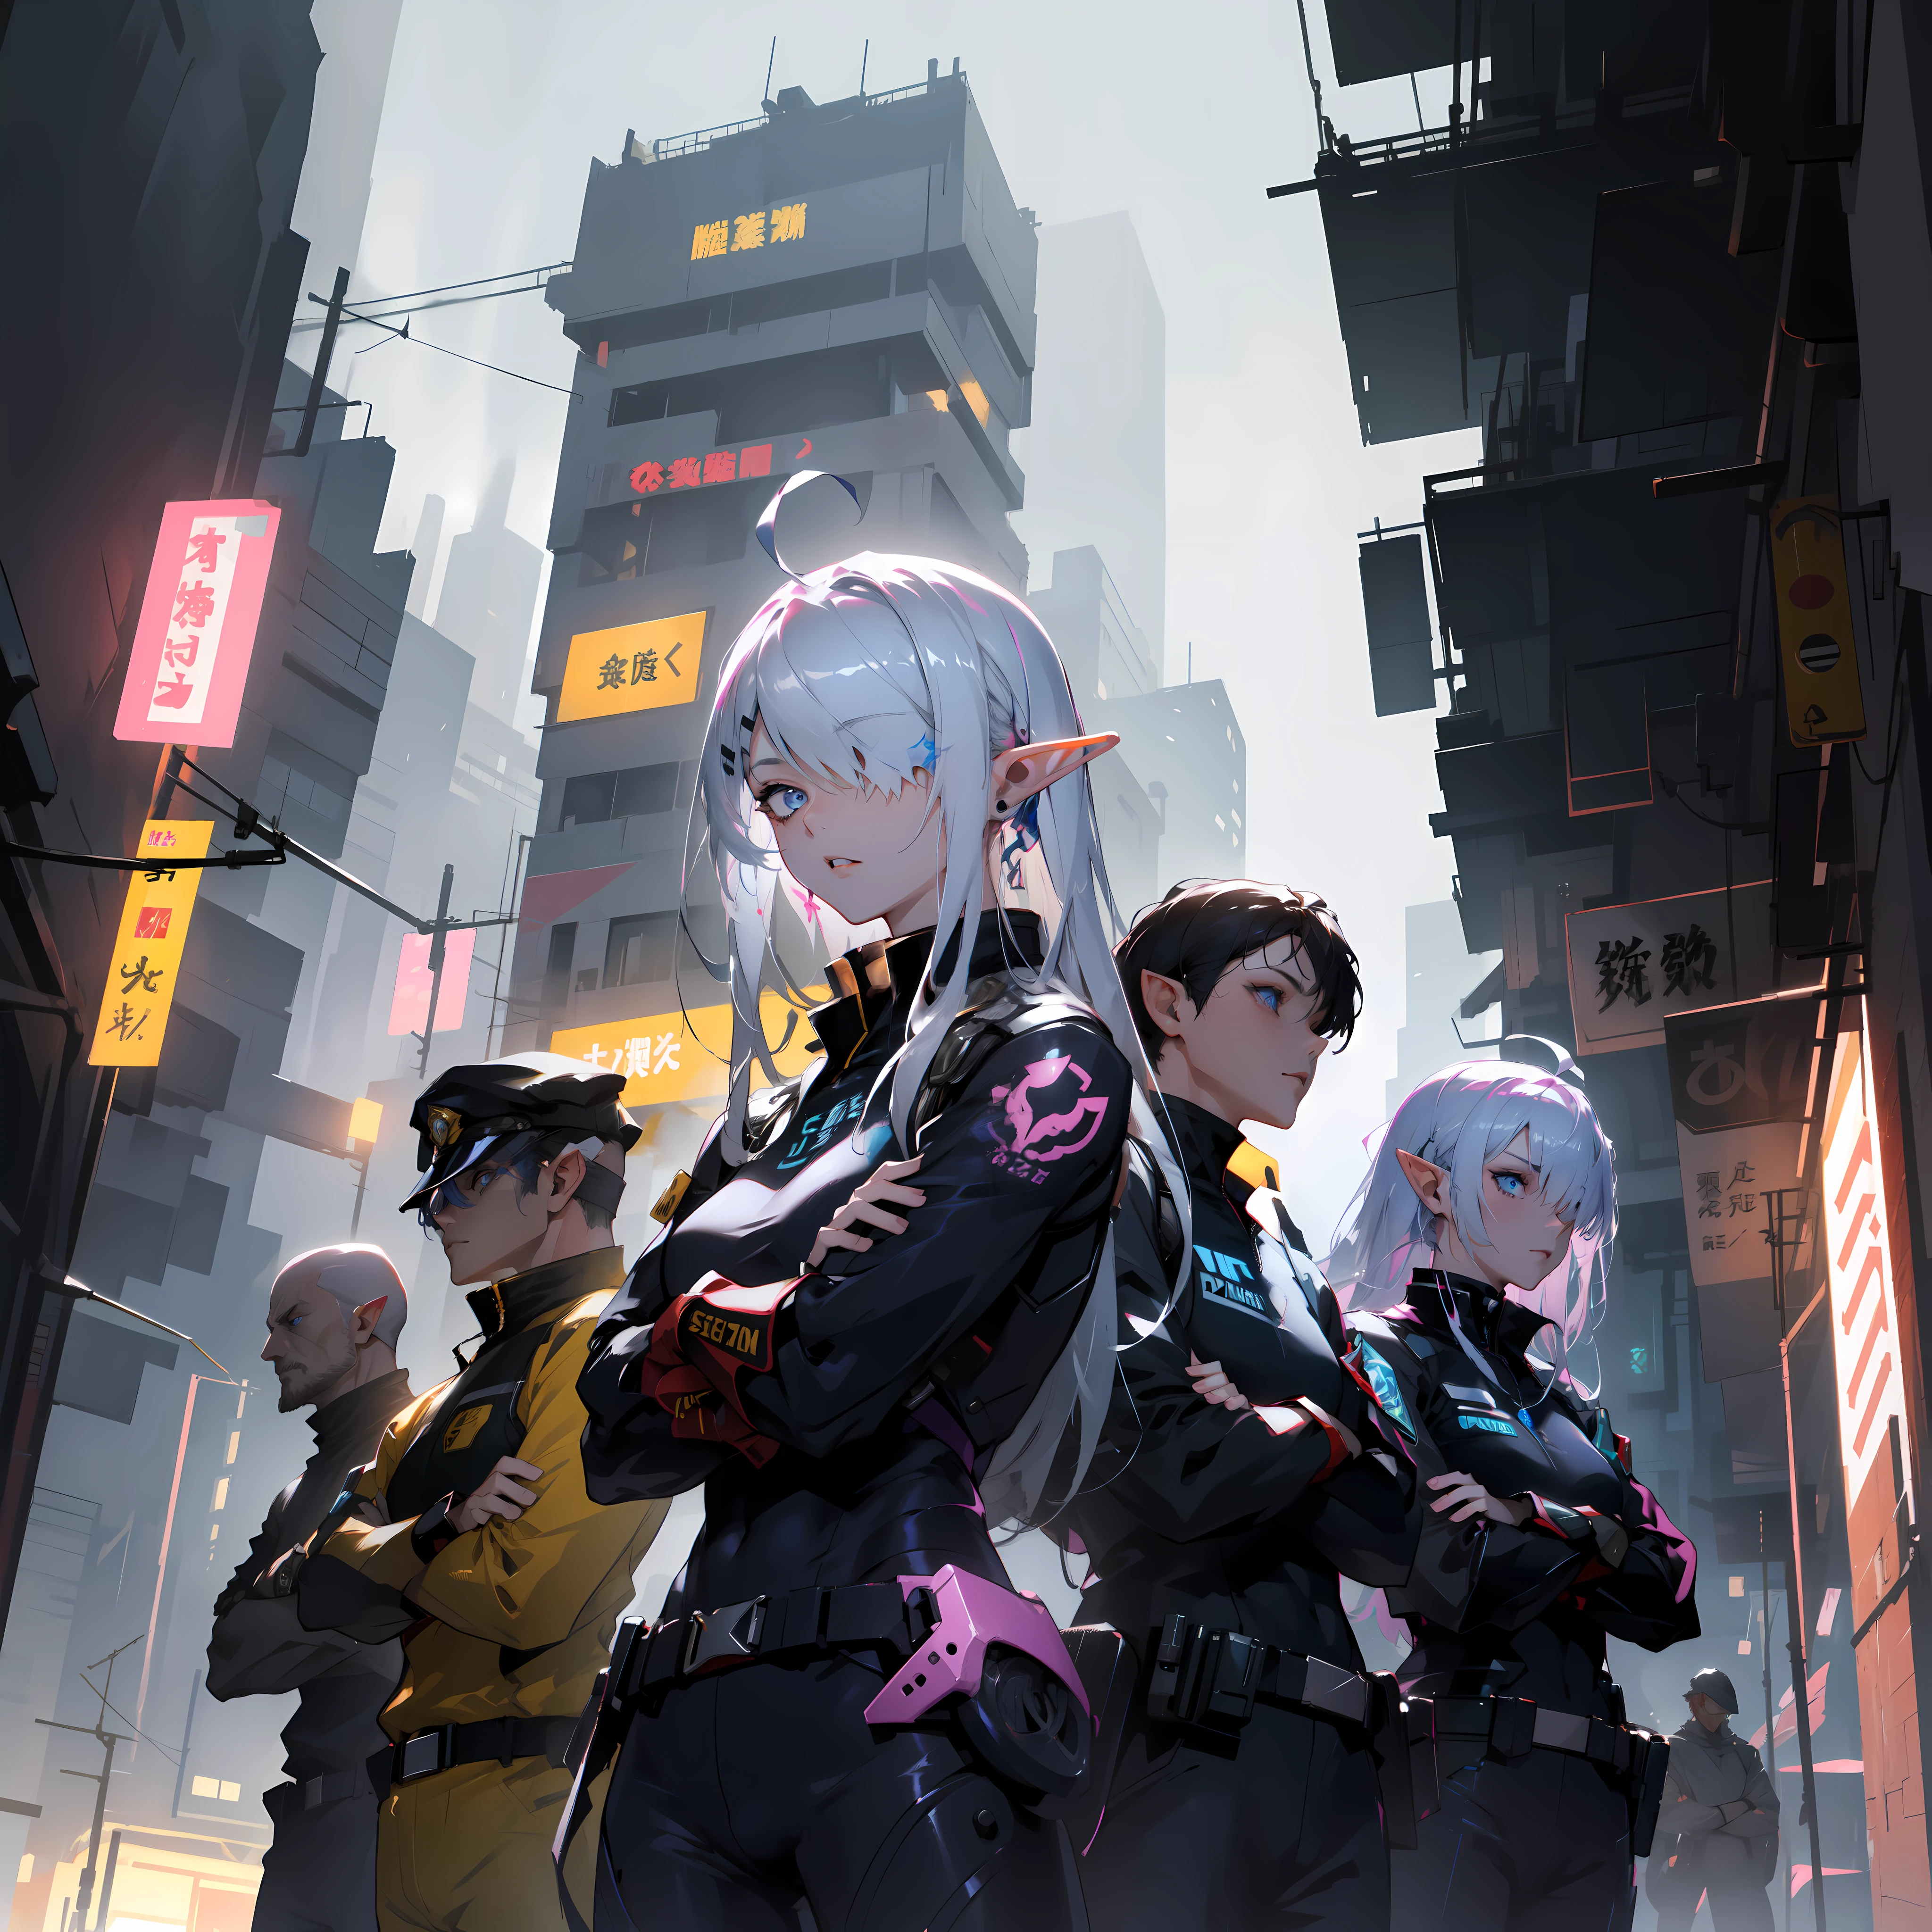 ((masterpiece)), (top quality), (best quality), ((ultra-detailed, 8k quality)), Aesthetics, Cinematic lighting, (detailed line art), absurdres, (best composition), (high-resolution),
BREAK,
Beauty of a elf girl, mecha girl, tech wear police uniform organic cyborg, white plastic, yellow techwear clothing, yellow and black safety tapes, full armor, Detailed Cloth, and armored Texture, She is major police in cyberpunkwith his squad, cyberpunk, cowboy shot, walked with ((crossed arms:1.2)), Cinematic dramatic atmosfer, fantasy, intricate, elegant, highly detailed, lifelike, photorealistic, digital painting, artstation, illustration, concept art, smooth, sharp focus, art by Yoji Shinkawa, by Mikimoto Haruhiko, by Artgerm,
BREAK,
highly detailed of (elf), (1girl), solo, perfect face, details eye, ahoge, ((long hair:1.2)), (hair over one eye:1.3), [[Messy hair]], shiny blonde white hair, blue eyes, multicolored hair, (eyelashes, eyeshadow, pink eyeshadow), smile, design art by Mikimoto Haruhiko, by Kawacy, By Yoshitaka Amano,
BREAK, 
((perfect anatomy)), perfect body, Abs, medium breast, best hands, perfect face, beautiful face, beautiful eyes, perfect eyes, (perfect fingers, deatailed fingers), correct anatomy, 
BREAK, 
Watercolor wash painting, muted colors, warm colors, best quality, delicate brushwork,painting style background, abandoned building, neon-lit cyberpunk cityscape, industrial, cables and pipes, ventilation ducts, police line, crowded The police squad walked behind the major, (depth of field:1.2), (blurry background:1.2),the style of Mikimoto Haruhiko, Artgerm, Kentaro Miura style, the style of Mikimoto Haruhiko, Artgerm, Kentaro Miura style,